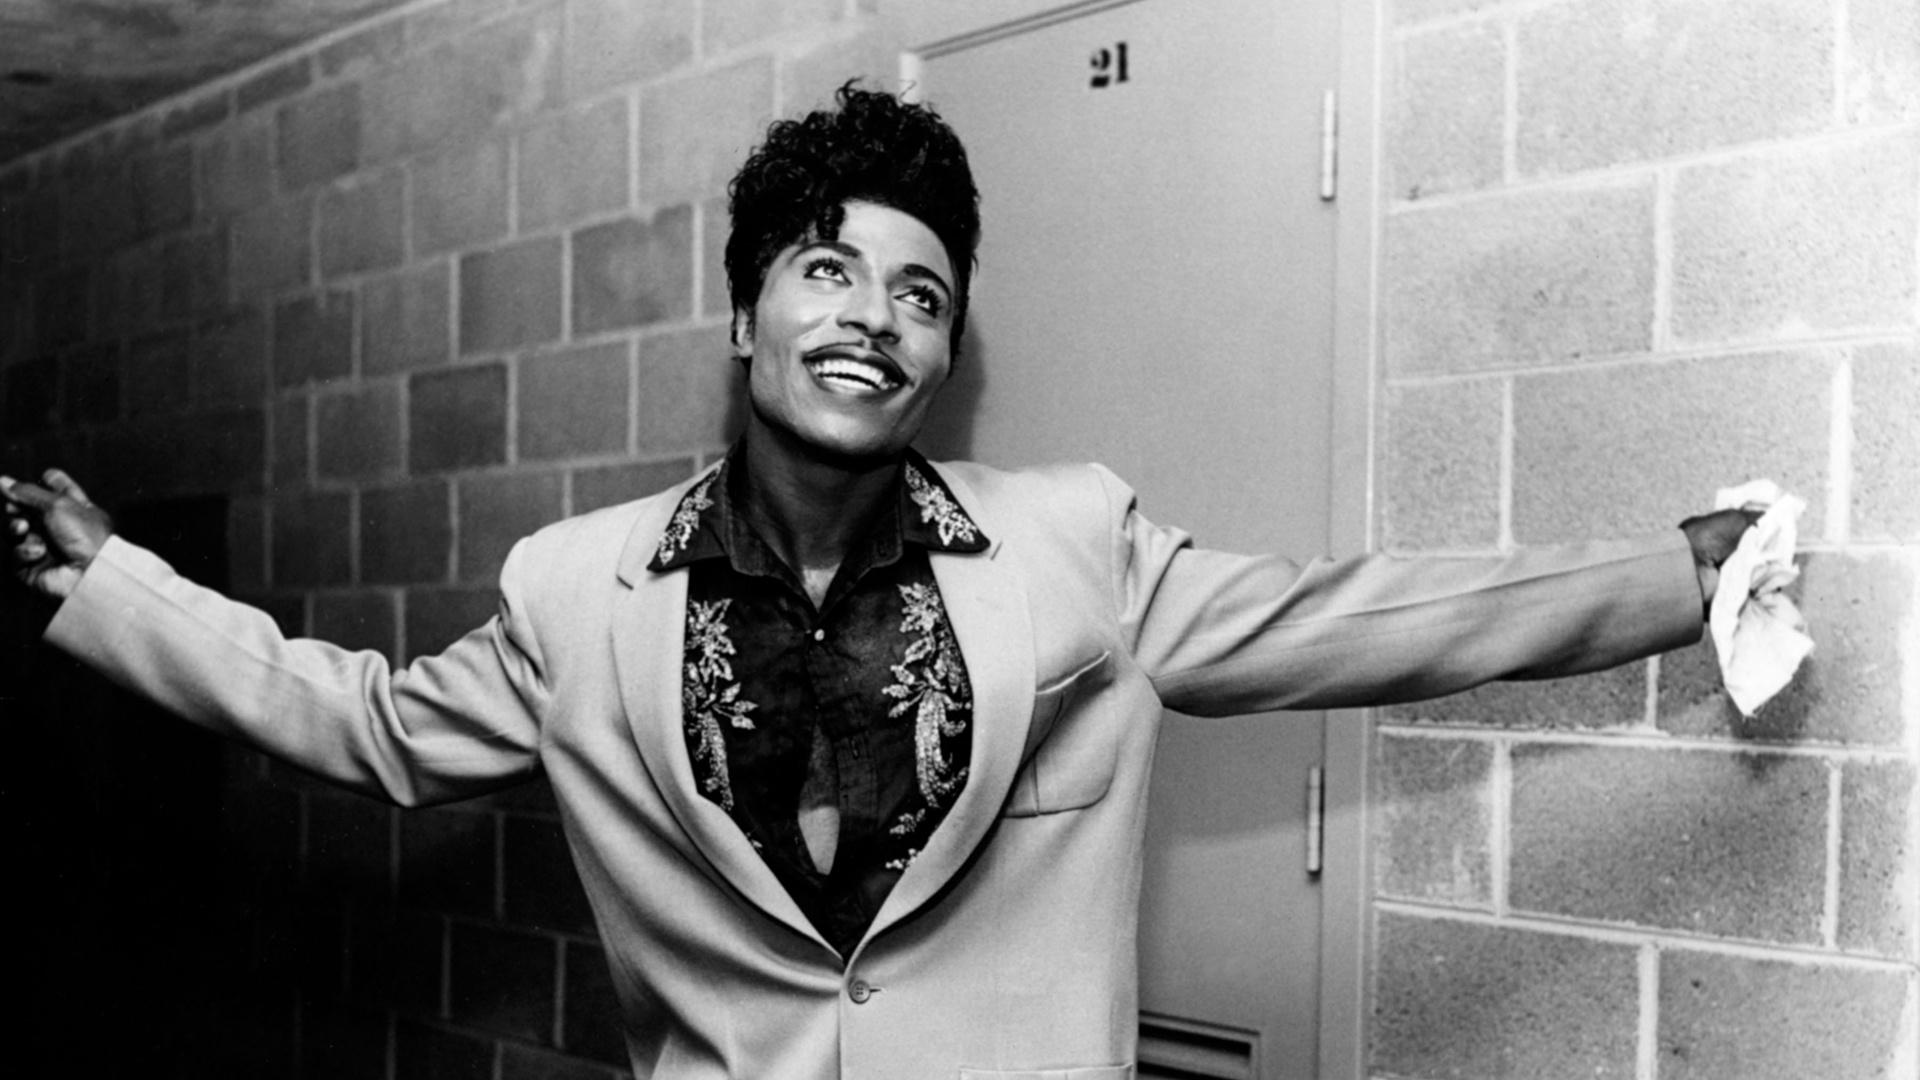 A photo Black and shite of Little Richard - a Black man with short Black hair and a mustache wearing a light suit and leaf patterned button down shirt.